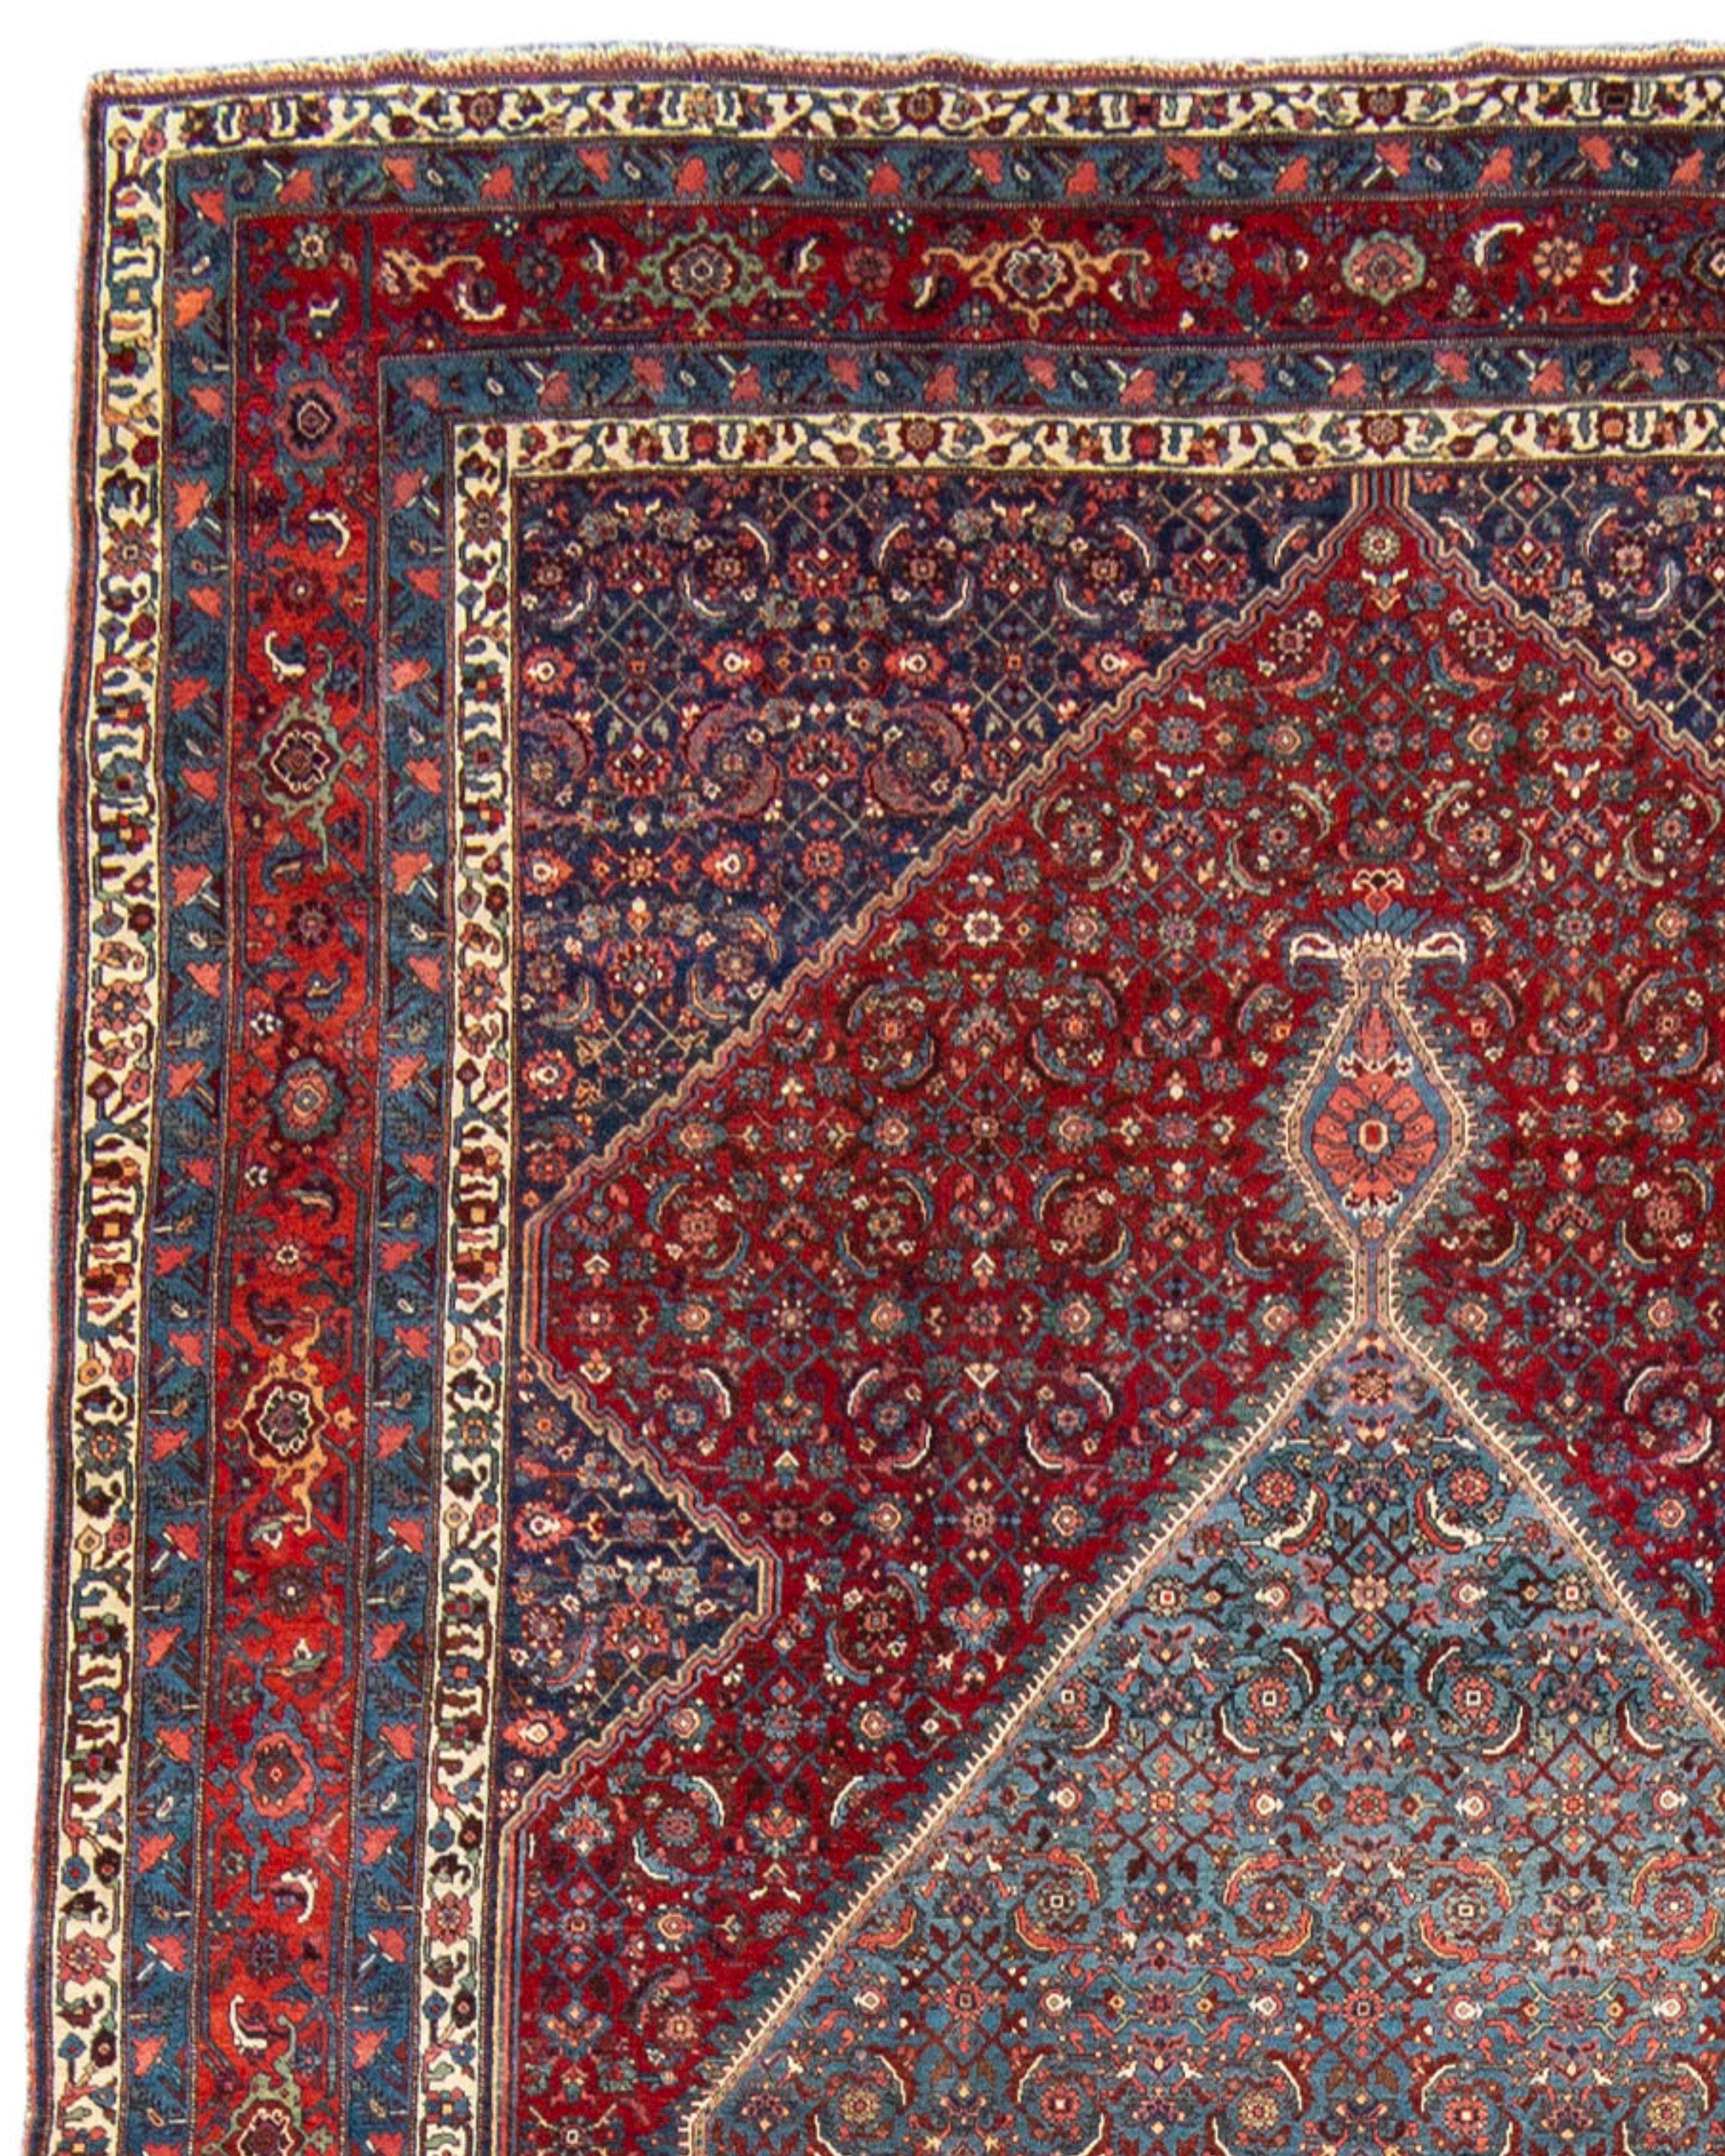 Hand-Knotted Antique Persian Bidjar Carpet, Late 19th Century For Sale